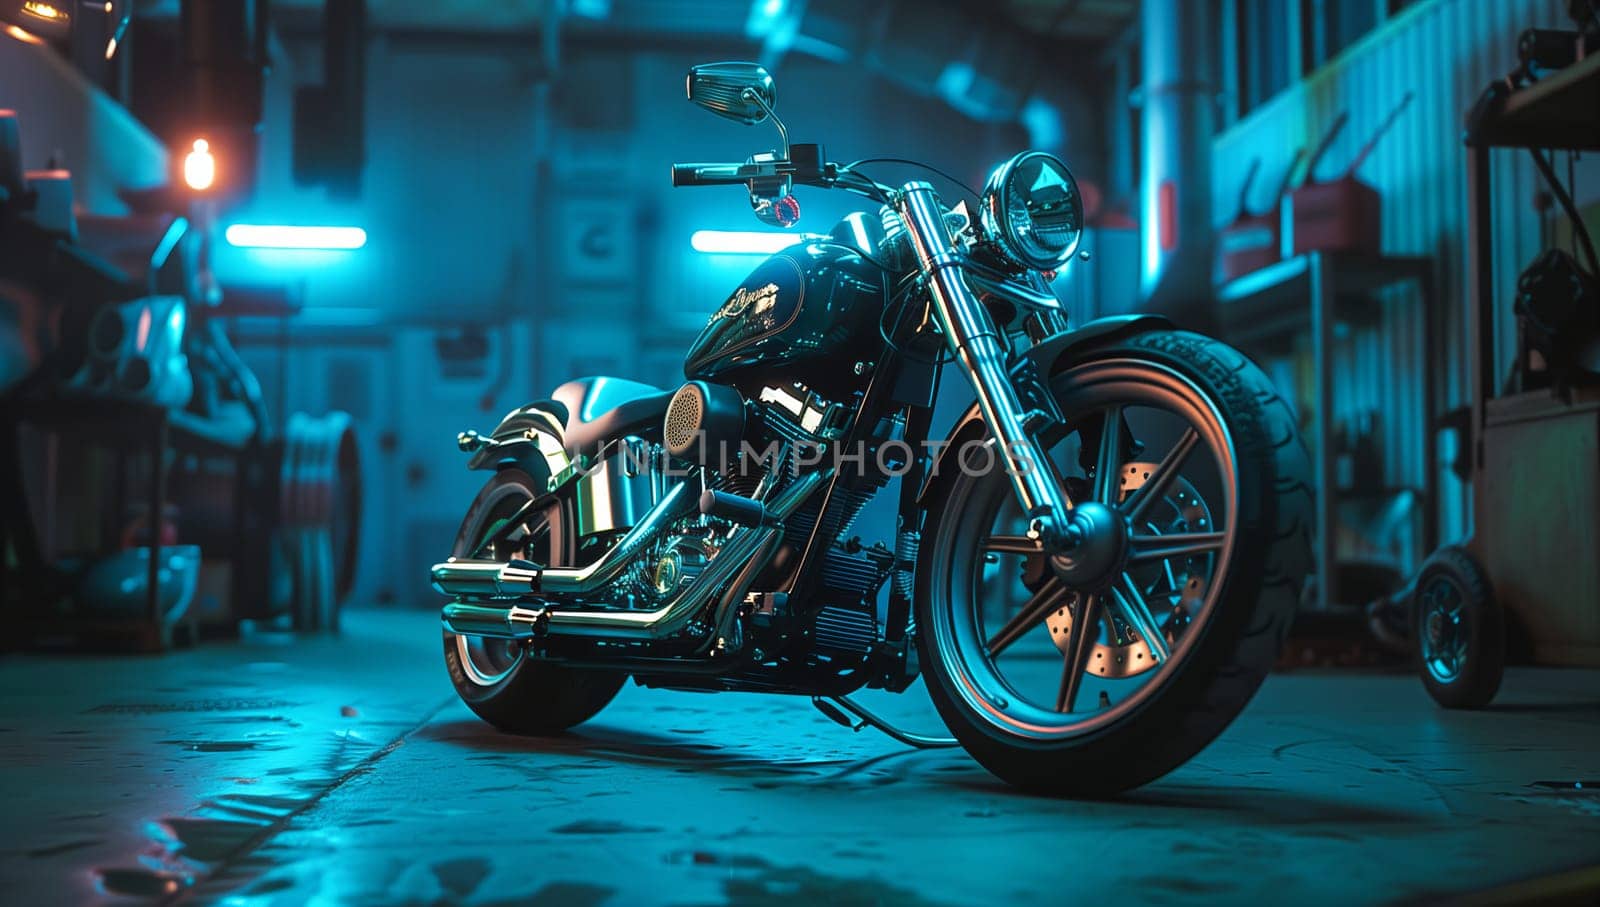 Motorcycle with tire and wheel parked in garage at night by richwolf